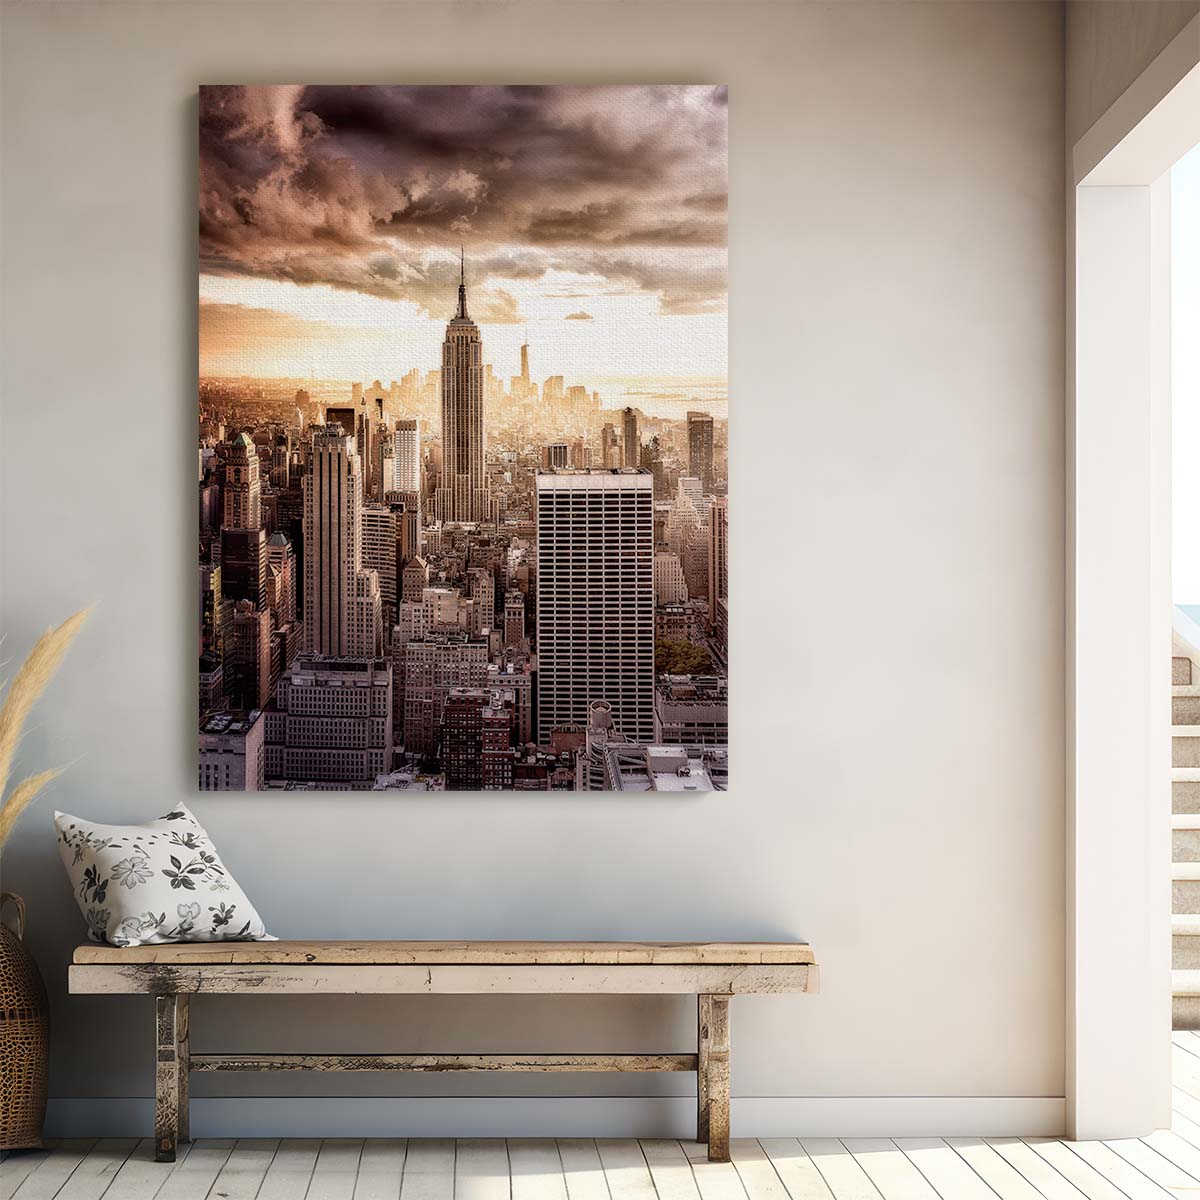 Golden Sunset Over NYC's Iconic Empire State Building Photography by Luxuriance Designs, made in USA